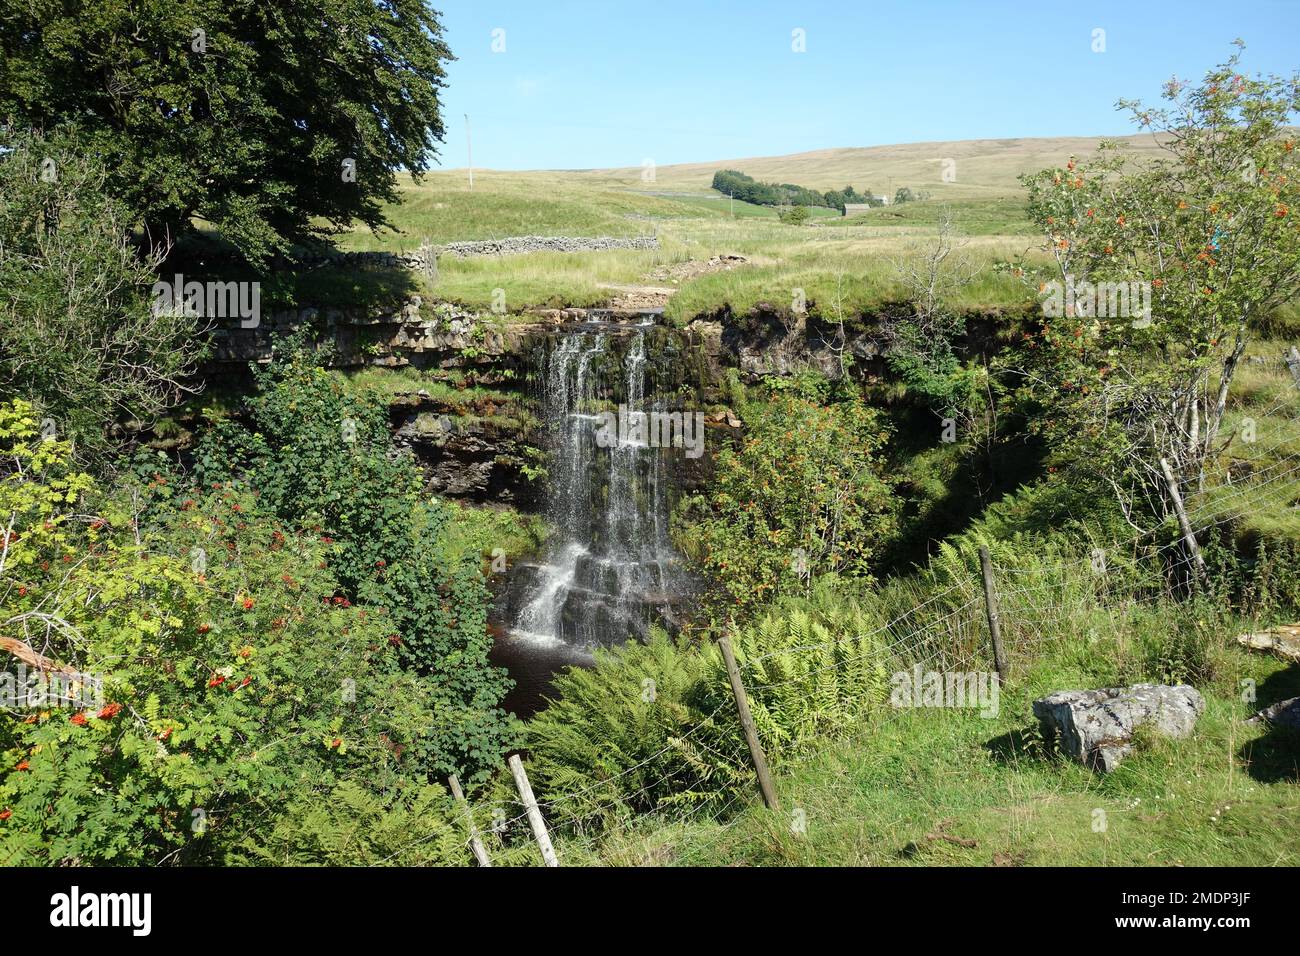 Hellgill Force by the B6259 Road  in the Eden Valley, Yorkshire Dales National Park, England, UK Stock Photo